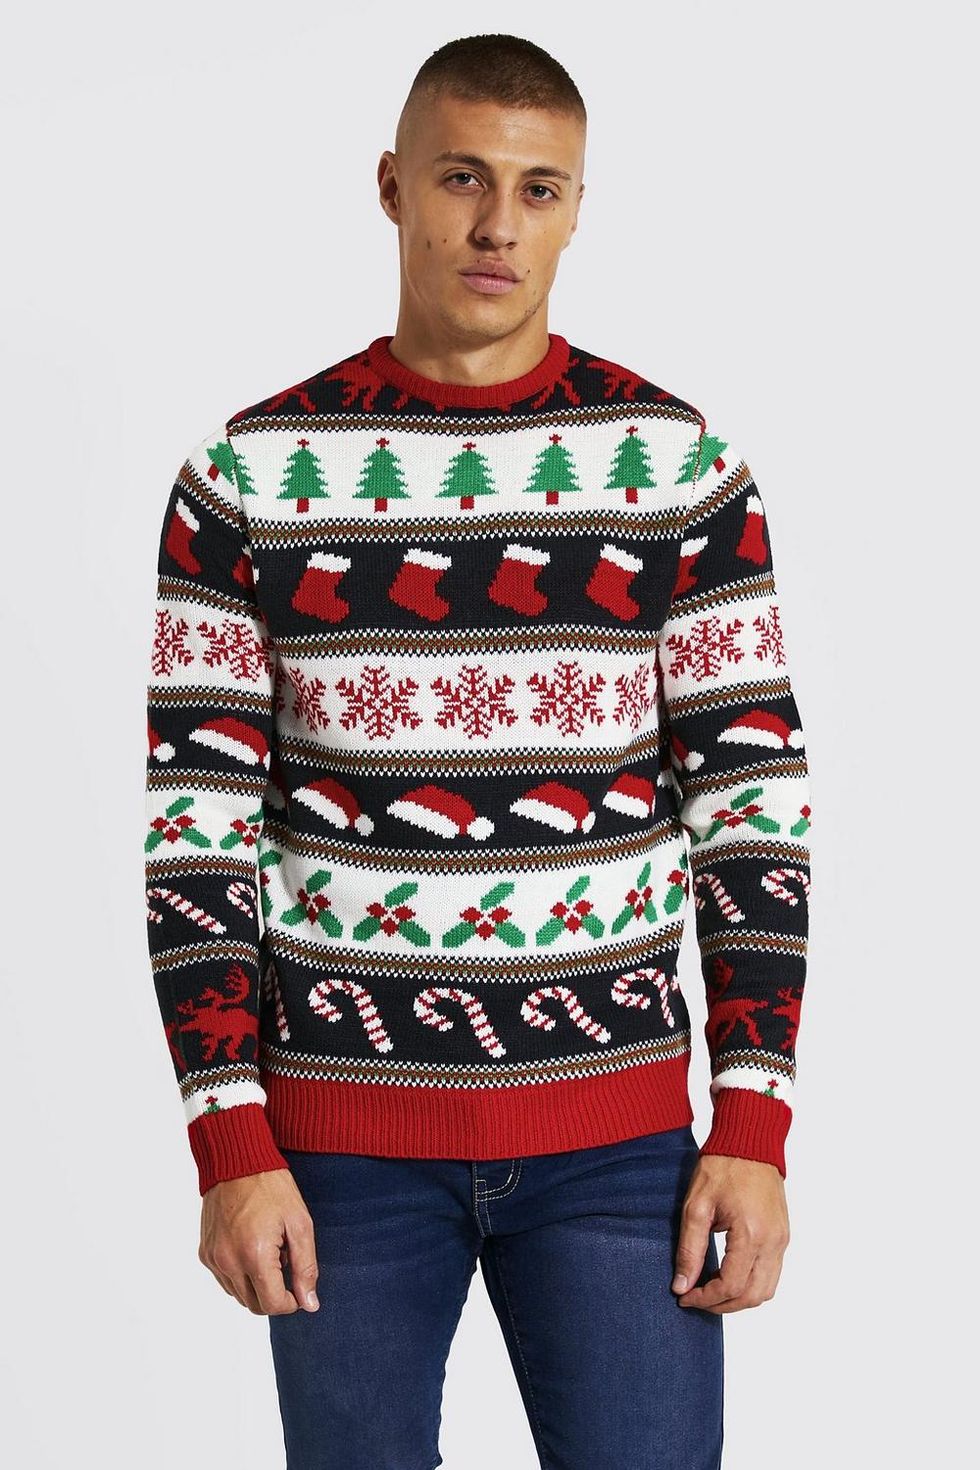 Best men's Christmas jumpers to buy on the high street